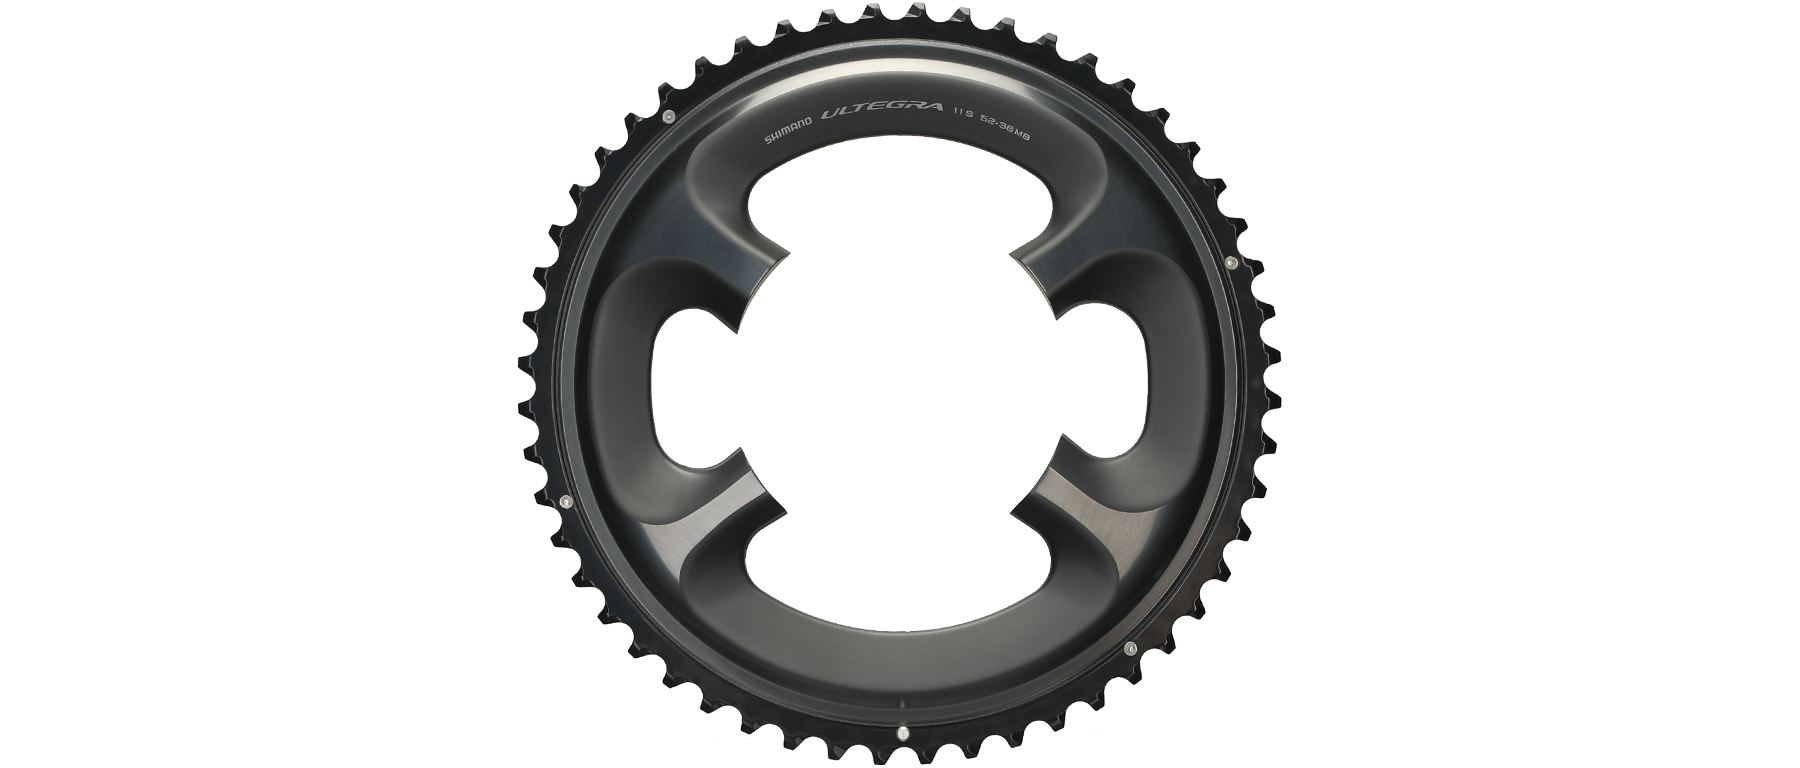 Shimano Ultegra FC-6800 Outer Chainring